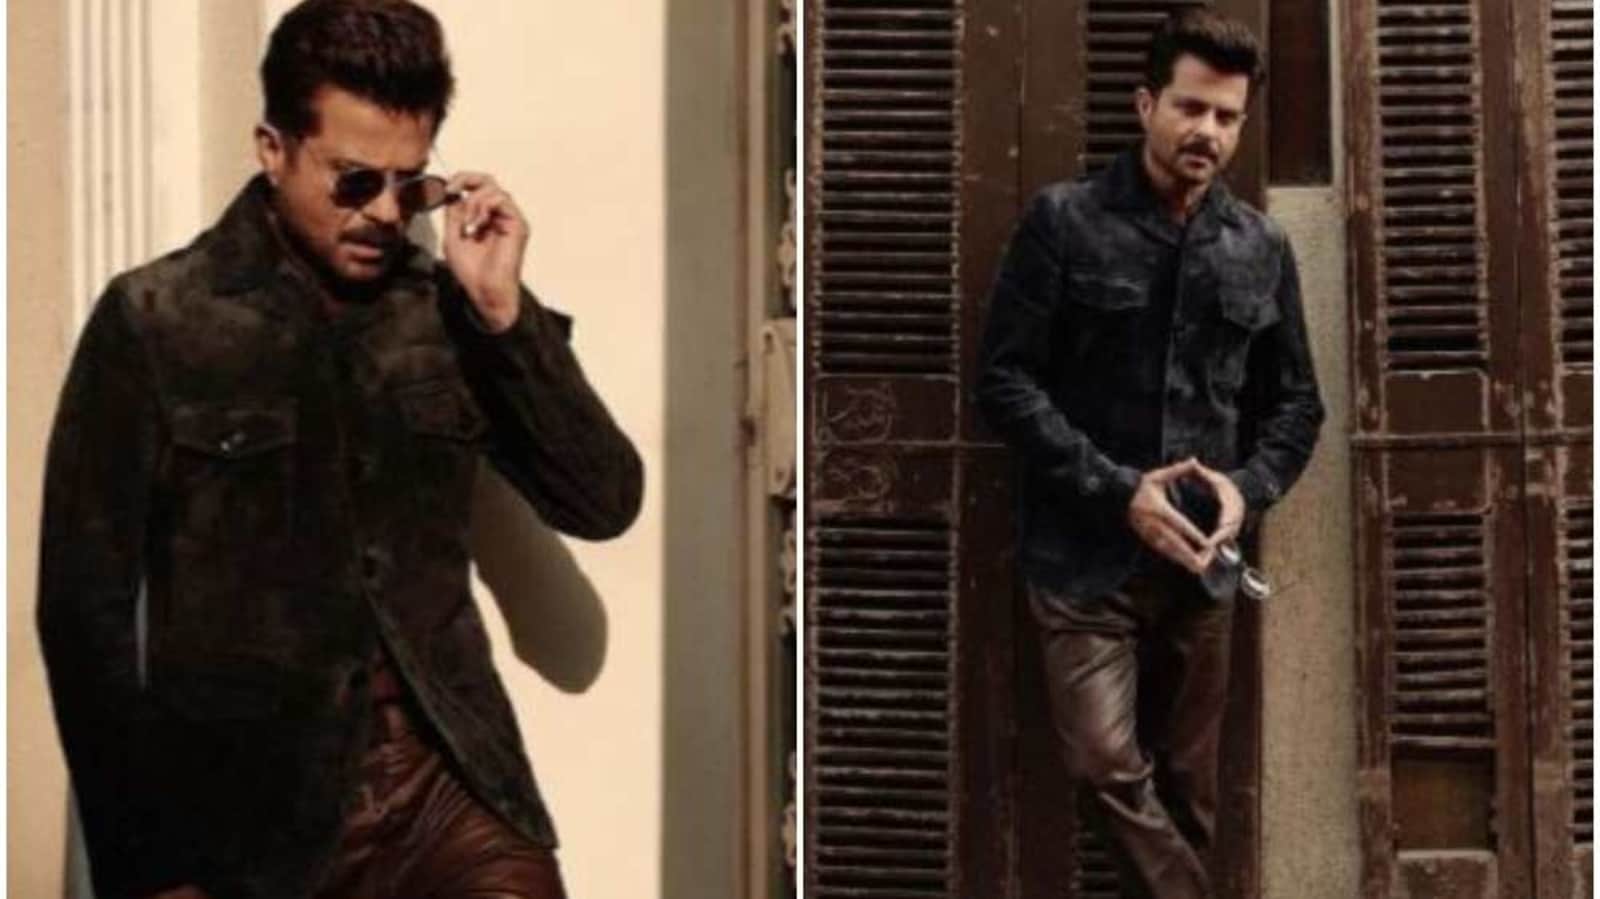 Anil Kapoor pulls out new photos, says he’s a “Bombay boy since 1956”, Neetu Kapoor calls him “fabulous”.  See here